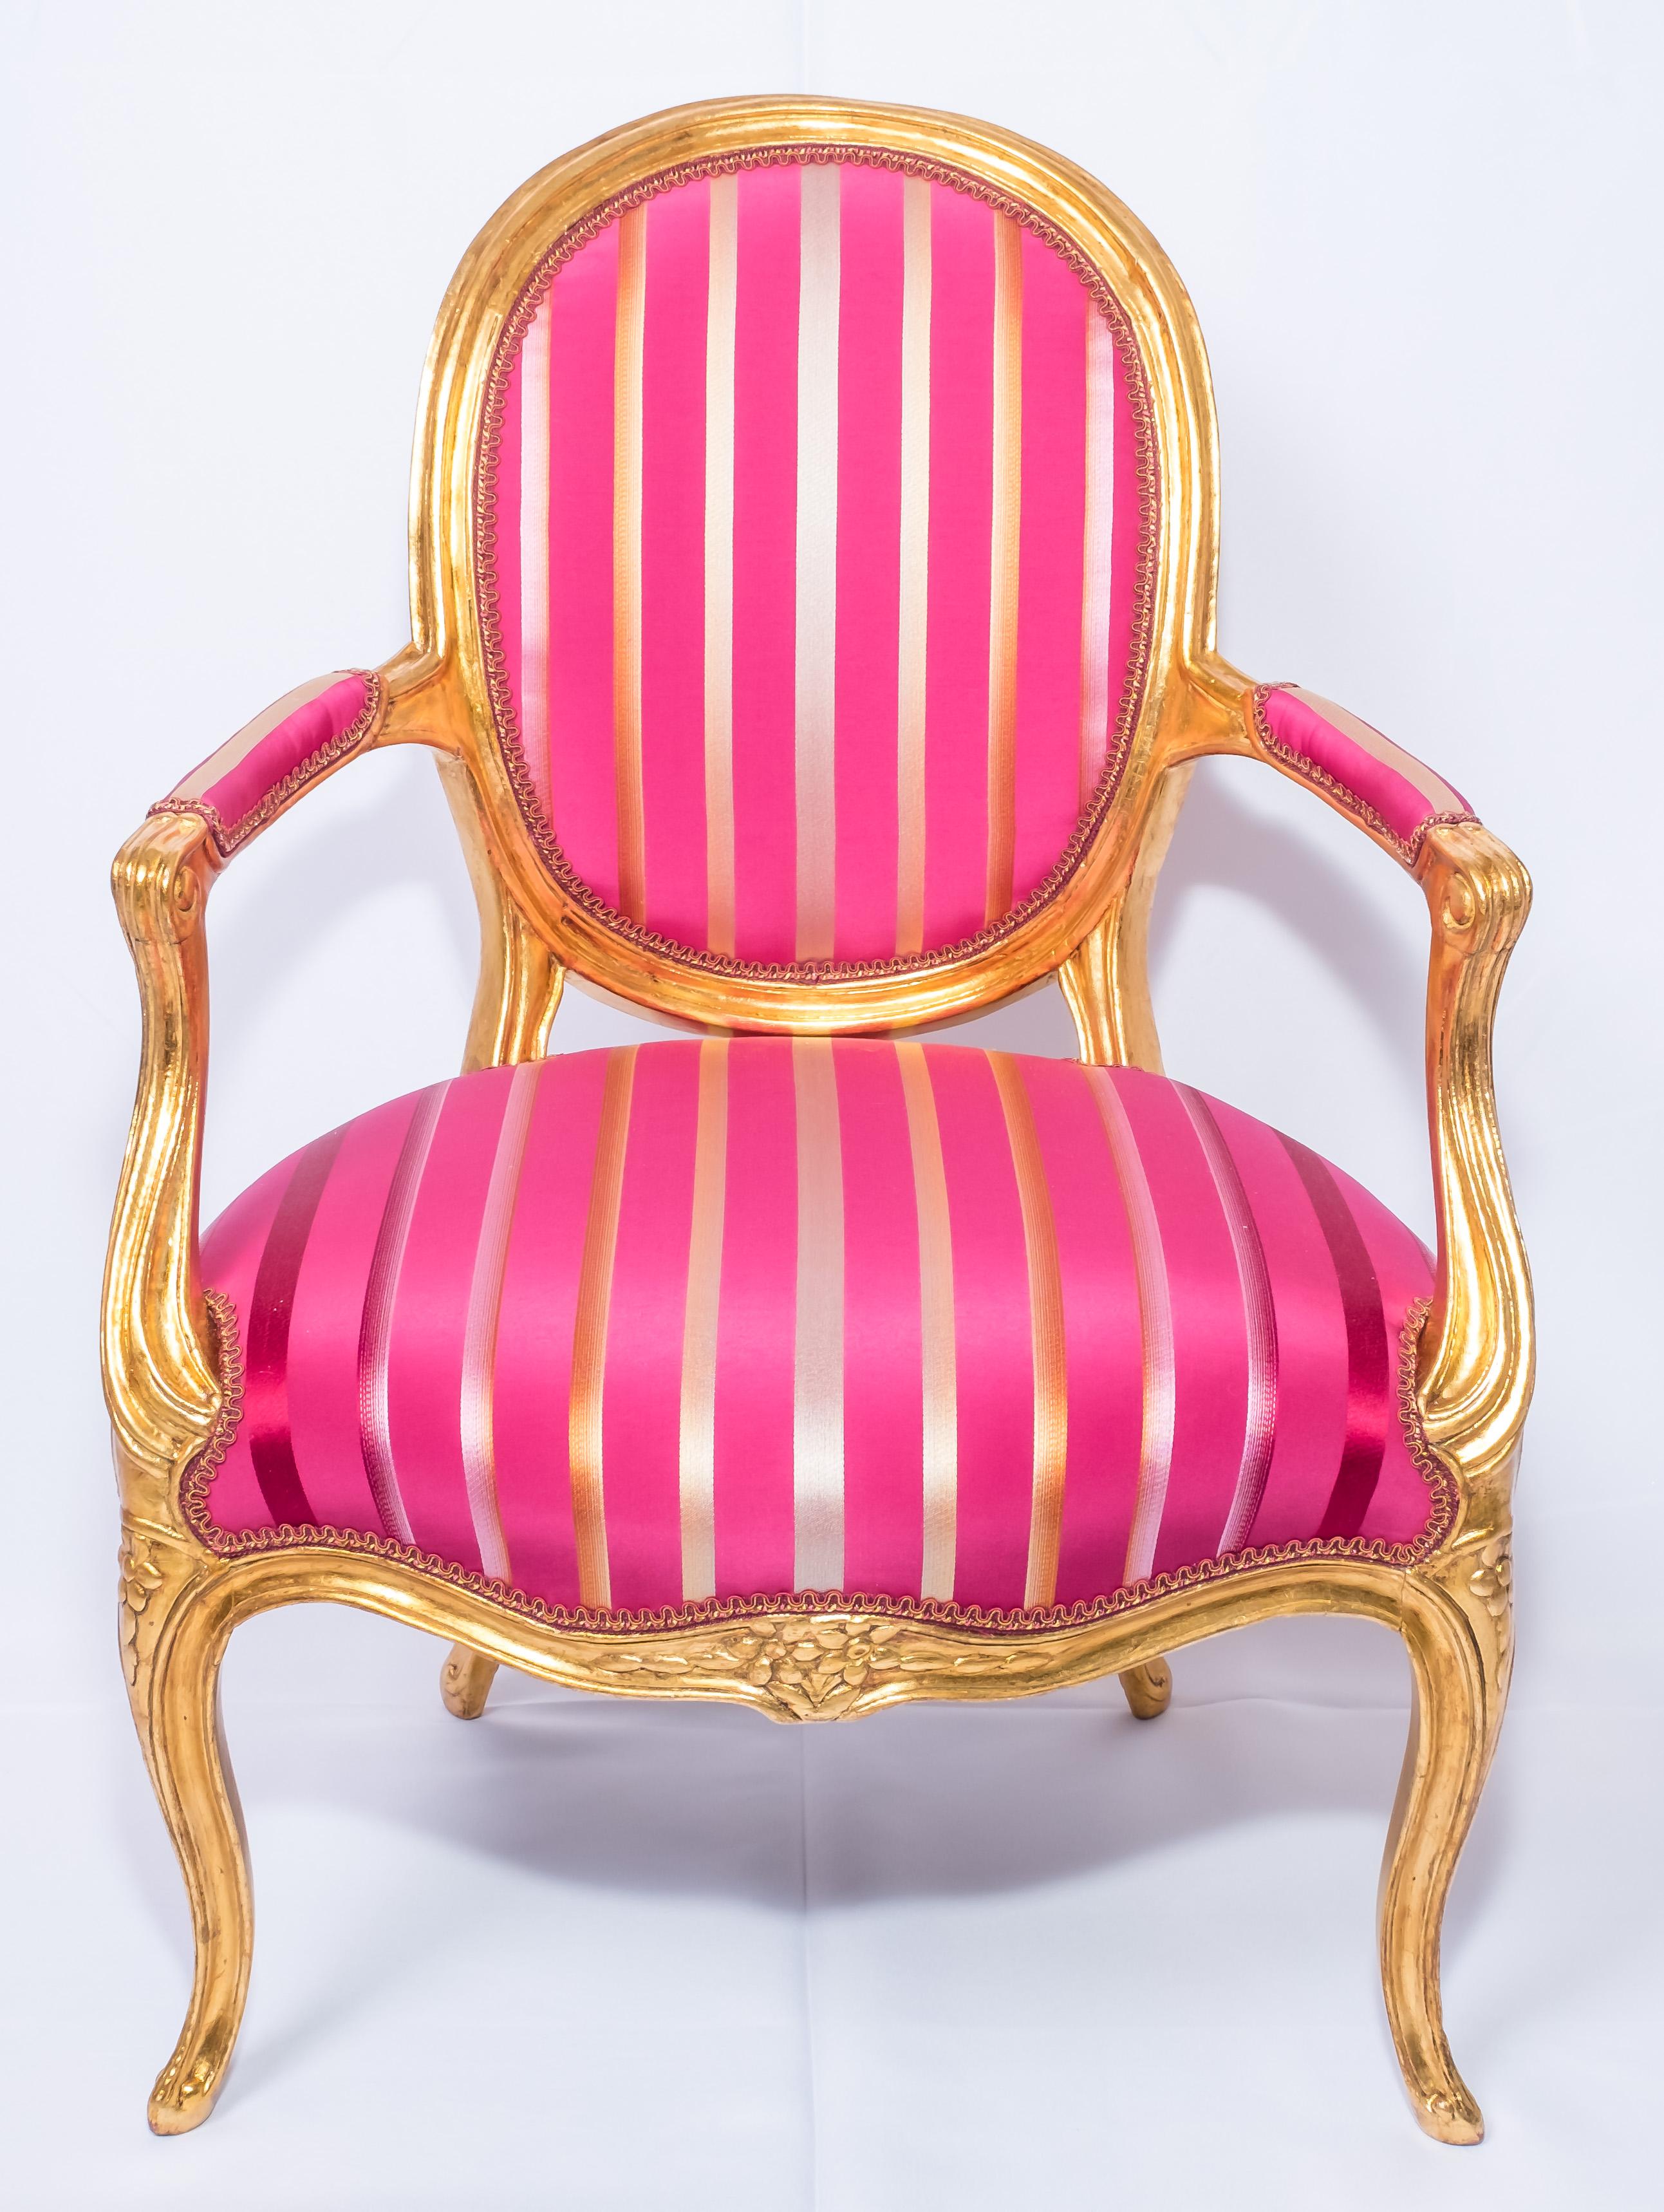 Original hand carved wood frame from the early 20th century, newly gilded with 24-karat gold leaves.
Newly upholstered with delicate and luxurious magenta color stripped fabric.
Measures: Height 87 cm, width 60.5 cm, depth 50 cm.

Ref.